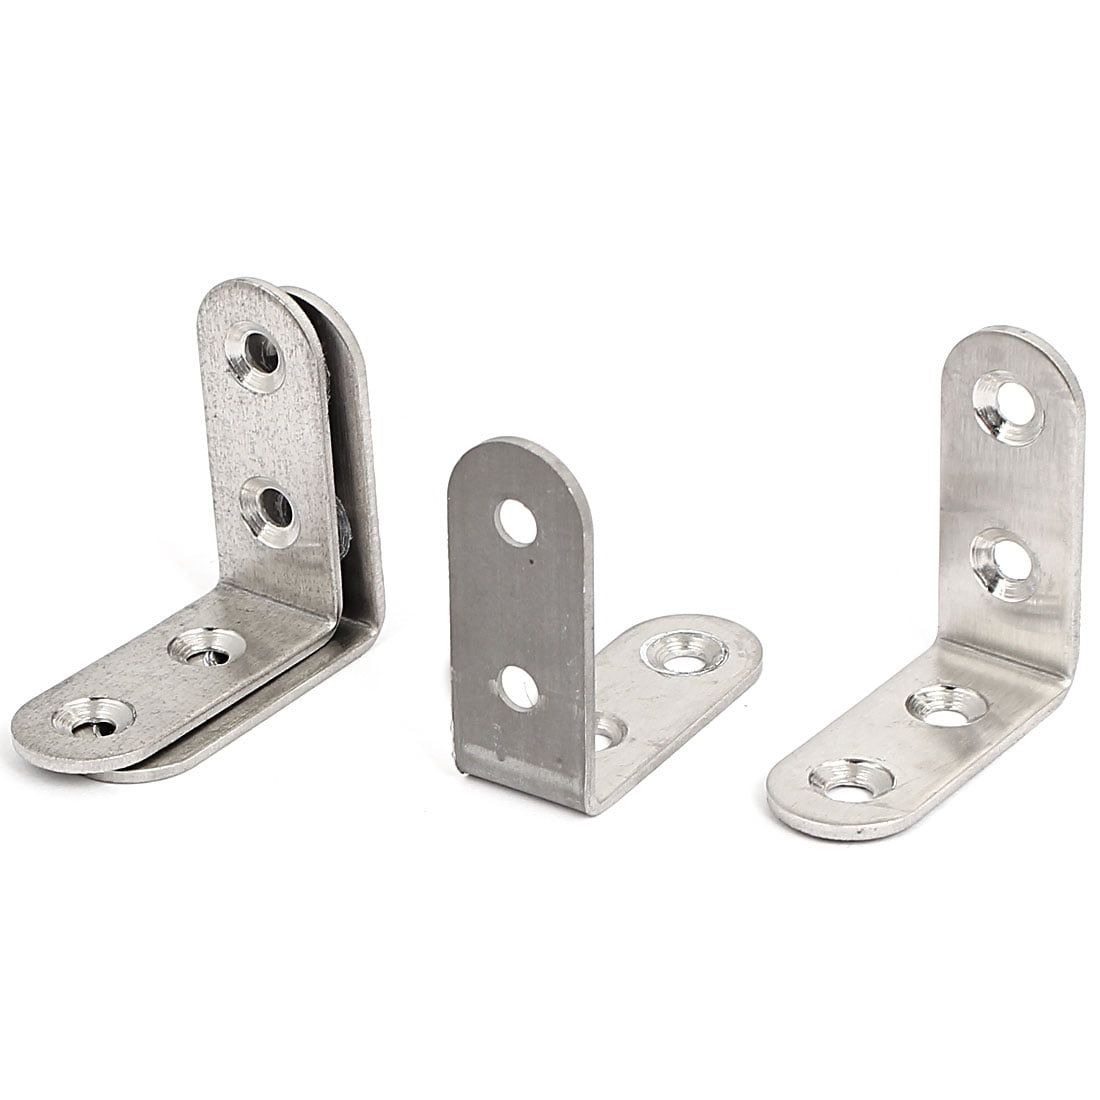 40 x 40 mm  funiture 90 Braces plated Hardware Corner Joint  25 x 25 30 x 30 